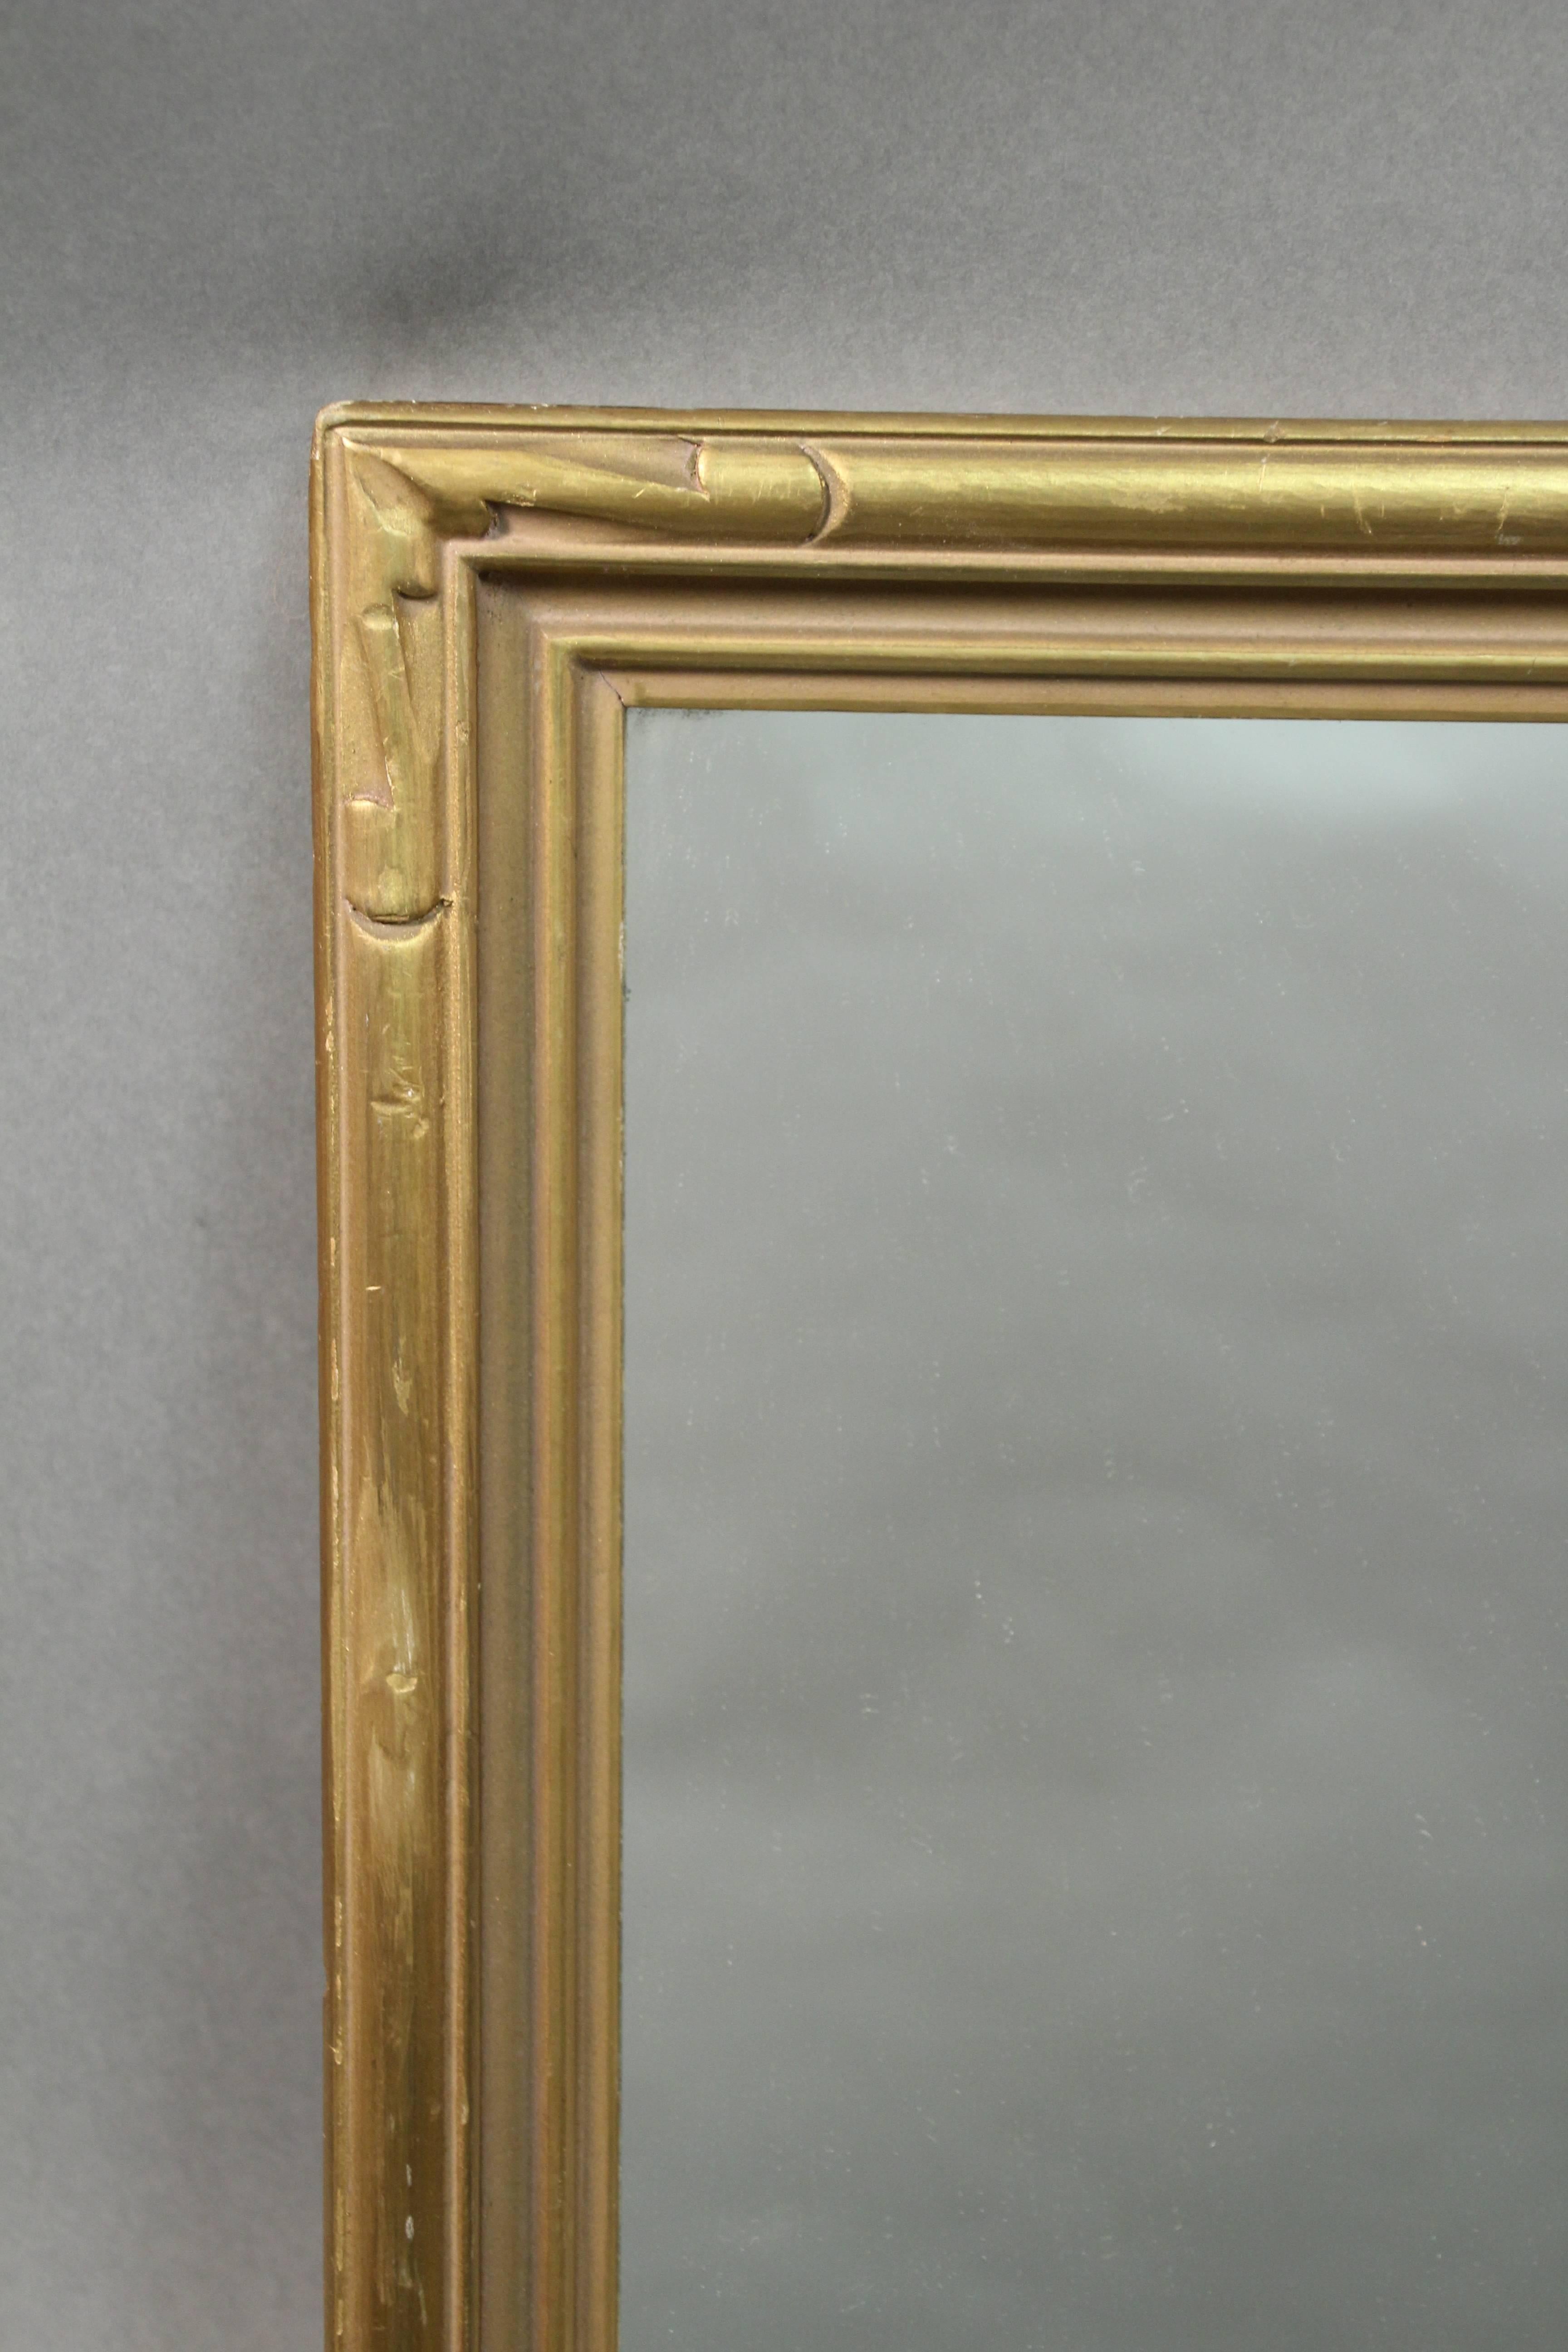 Mirror, circa 1920s. Carved wood frame. Original finish. Replaced mirror.